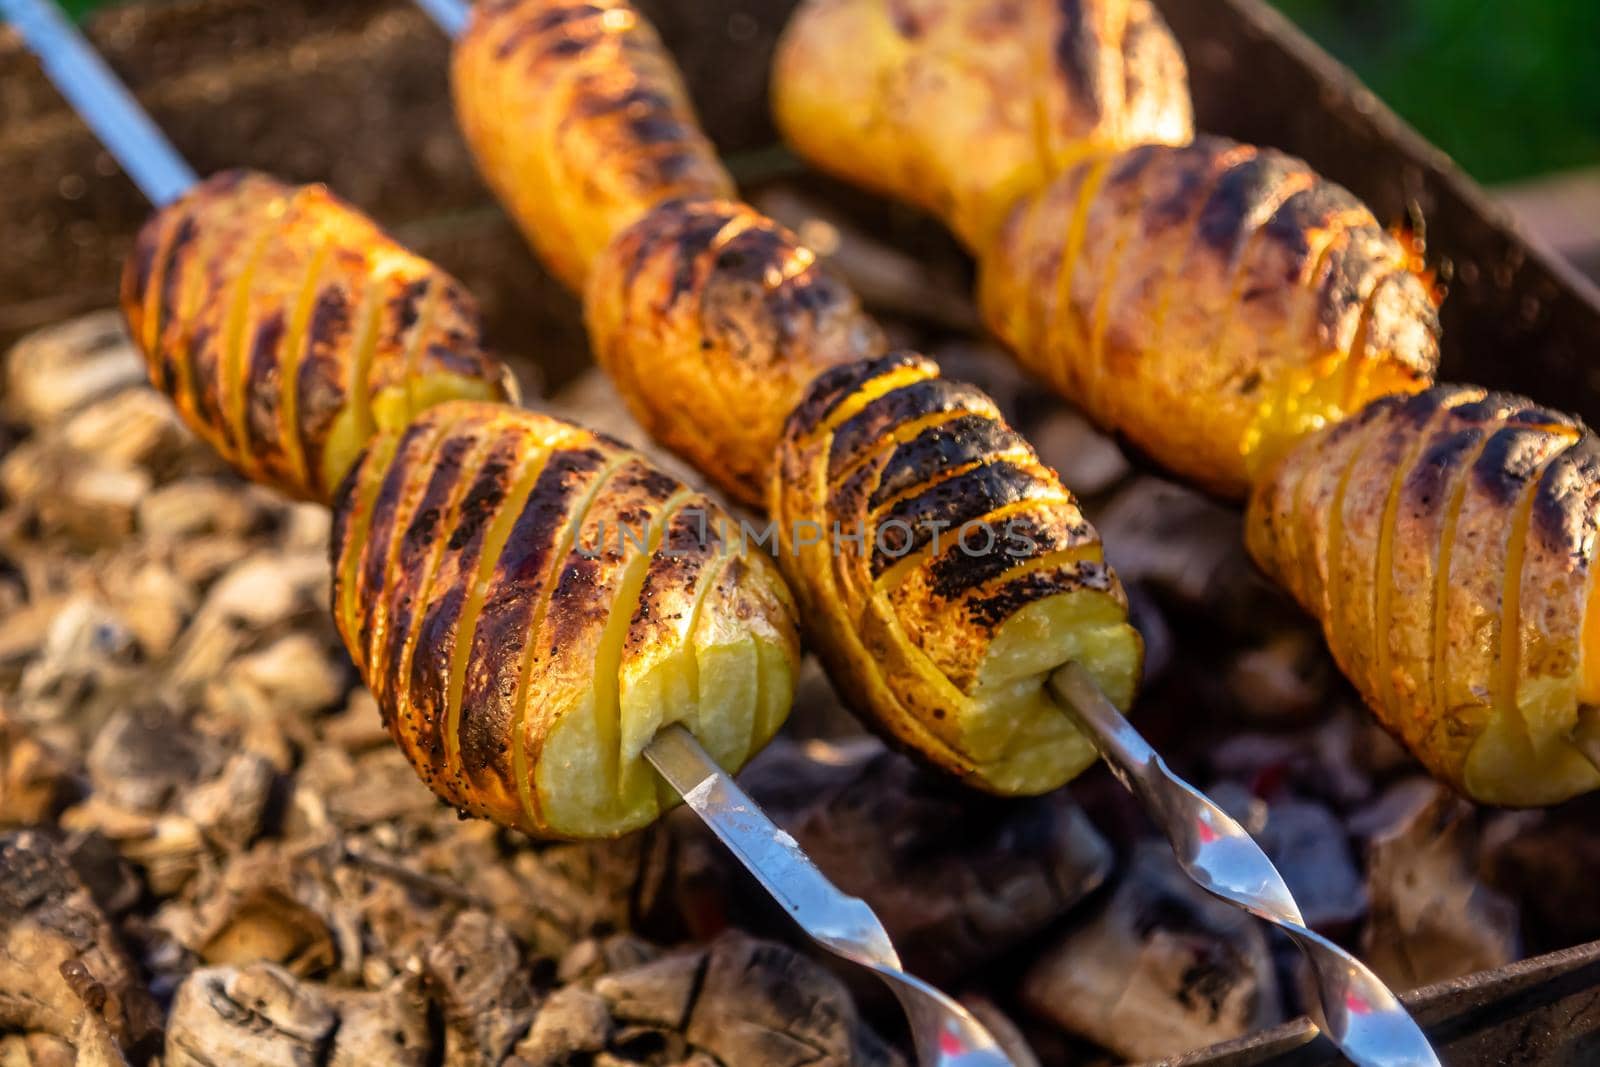 vegetarian skewers made from potatoes and mushrooms on the grill outdoors by Milanchikov